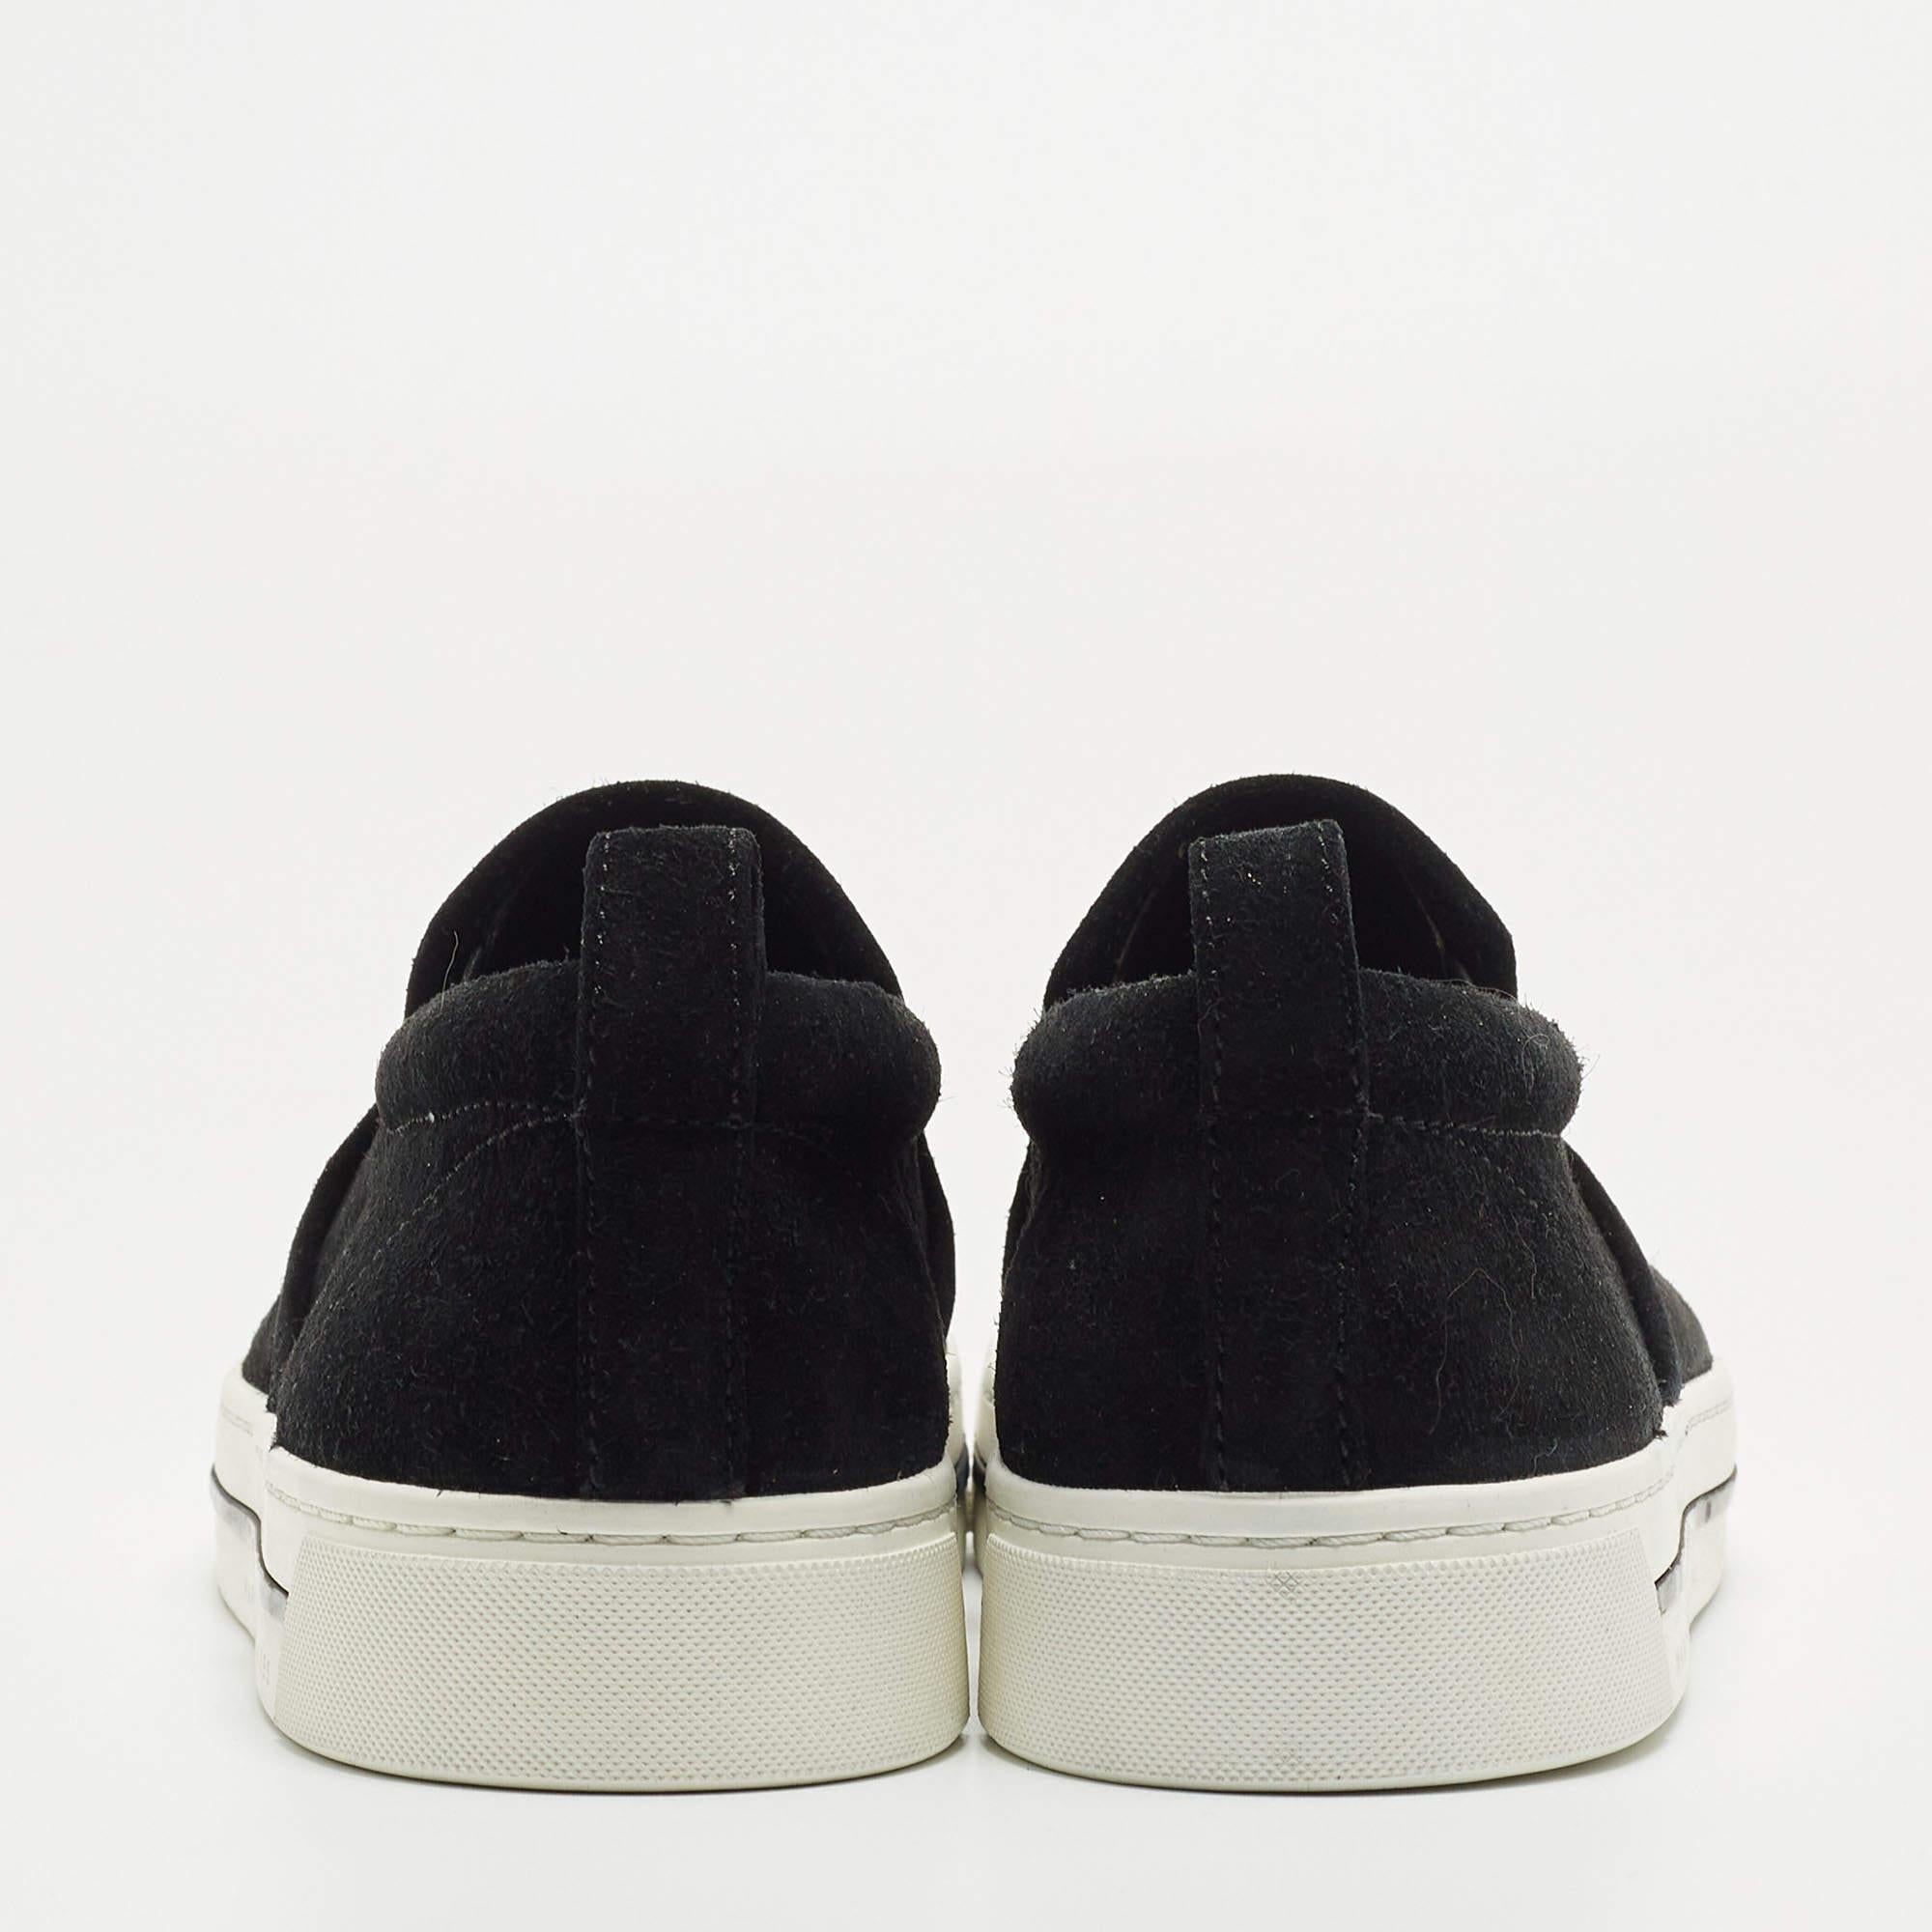 Marc By Marc Jacobs Black Suede GRRL Slip On Sneakers Size 37 For Sale 1